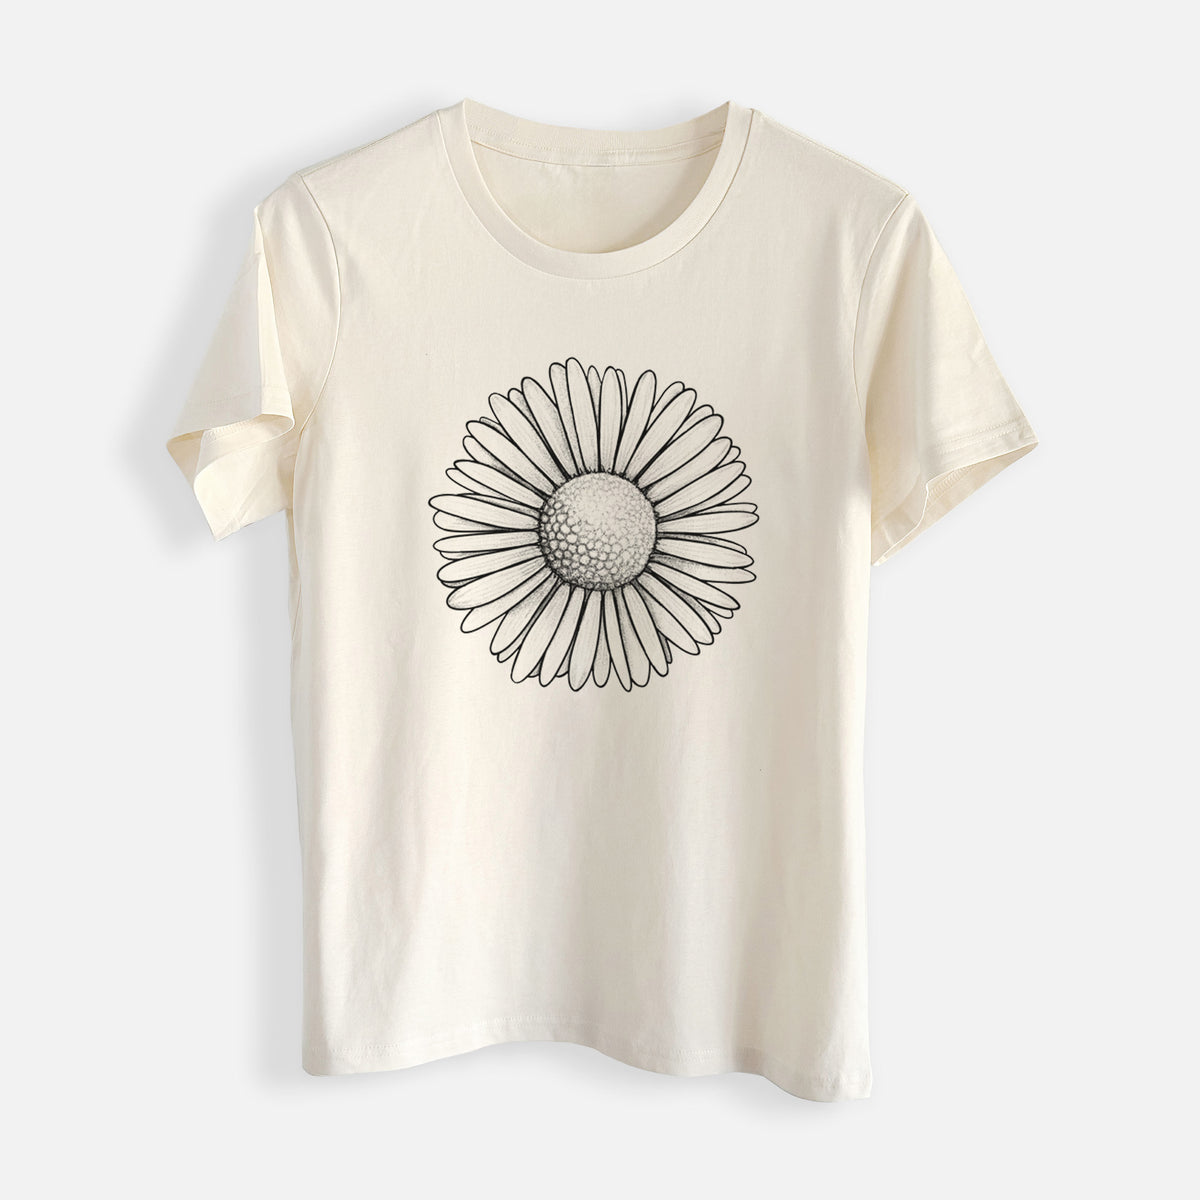 Bellis perennis - The Common Daisy - Womens Everyday Maple Tee